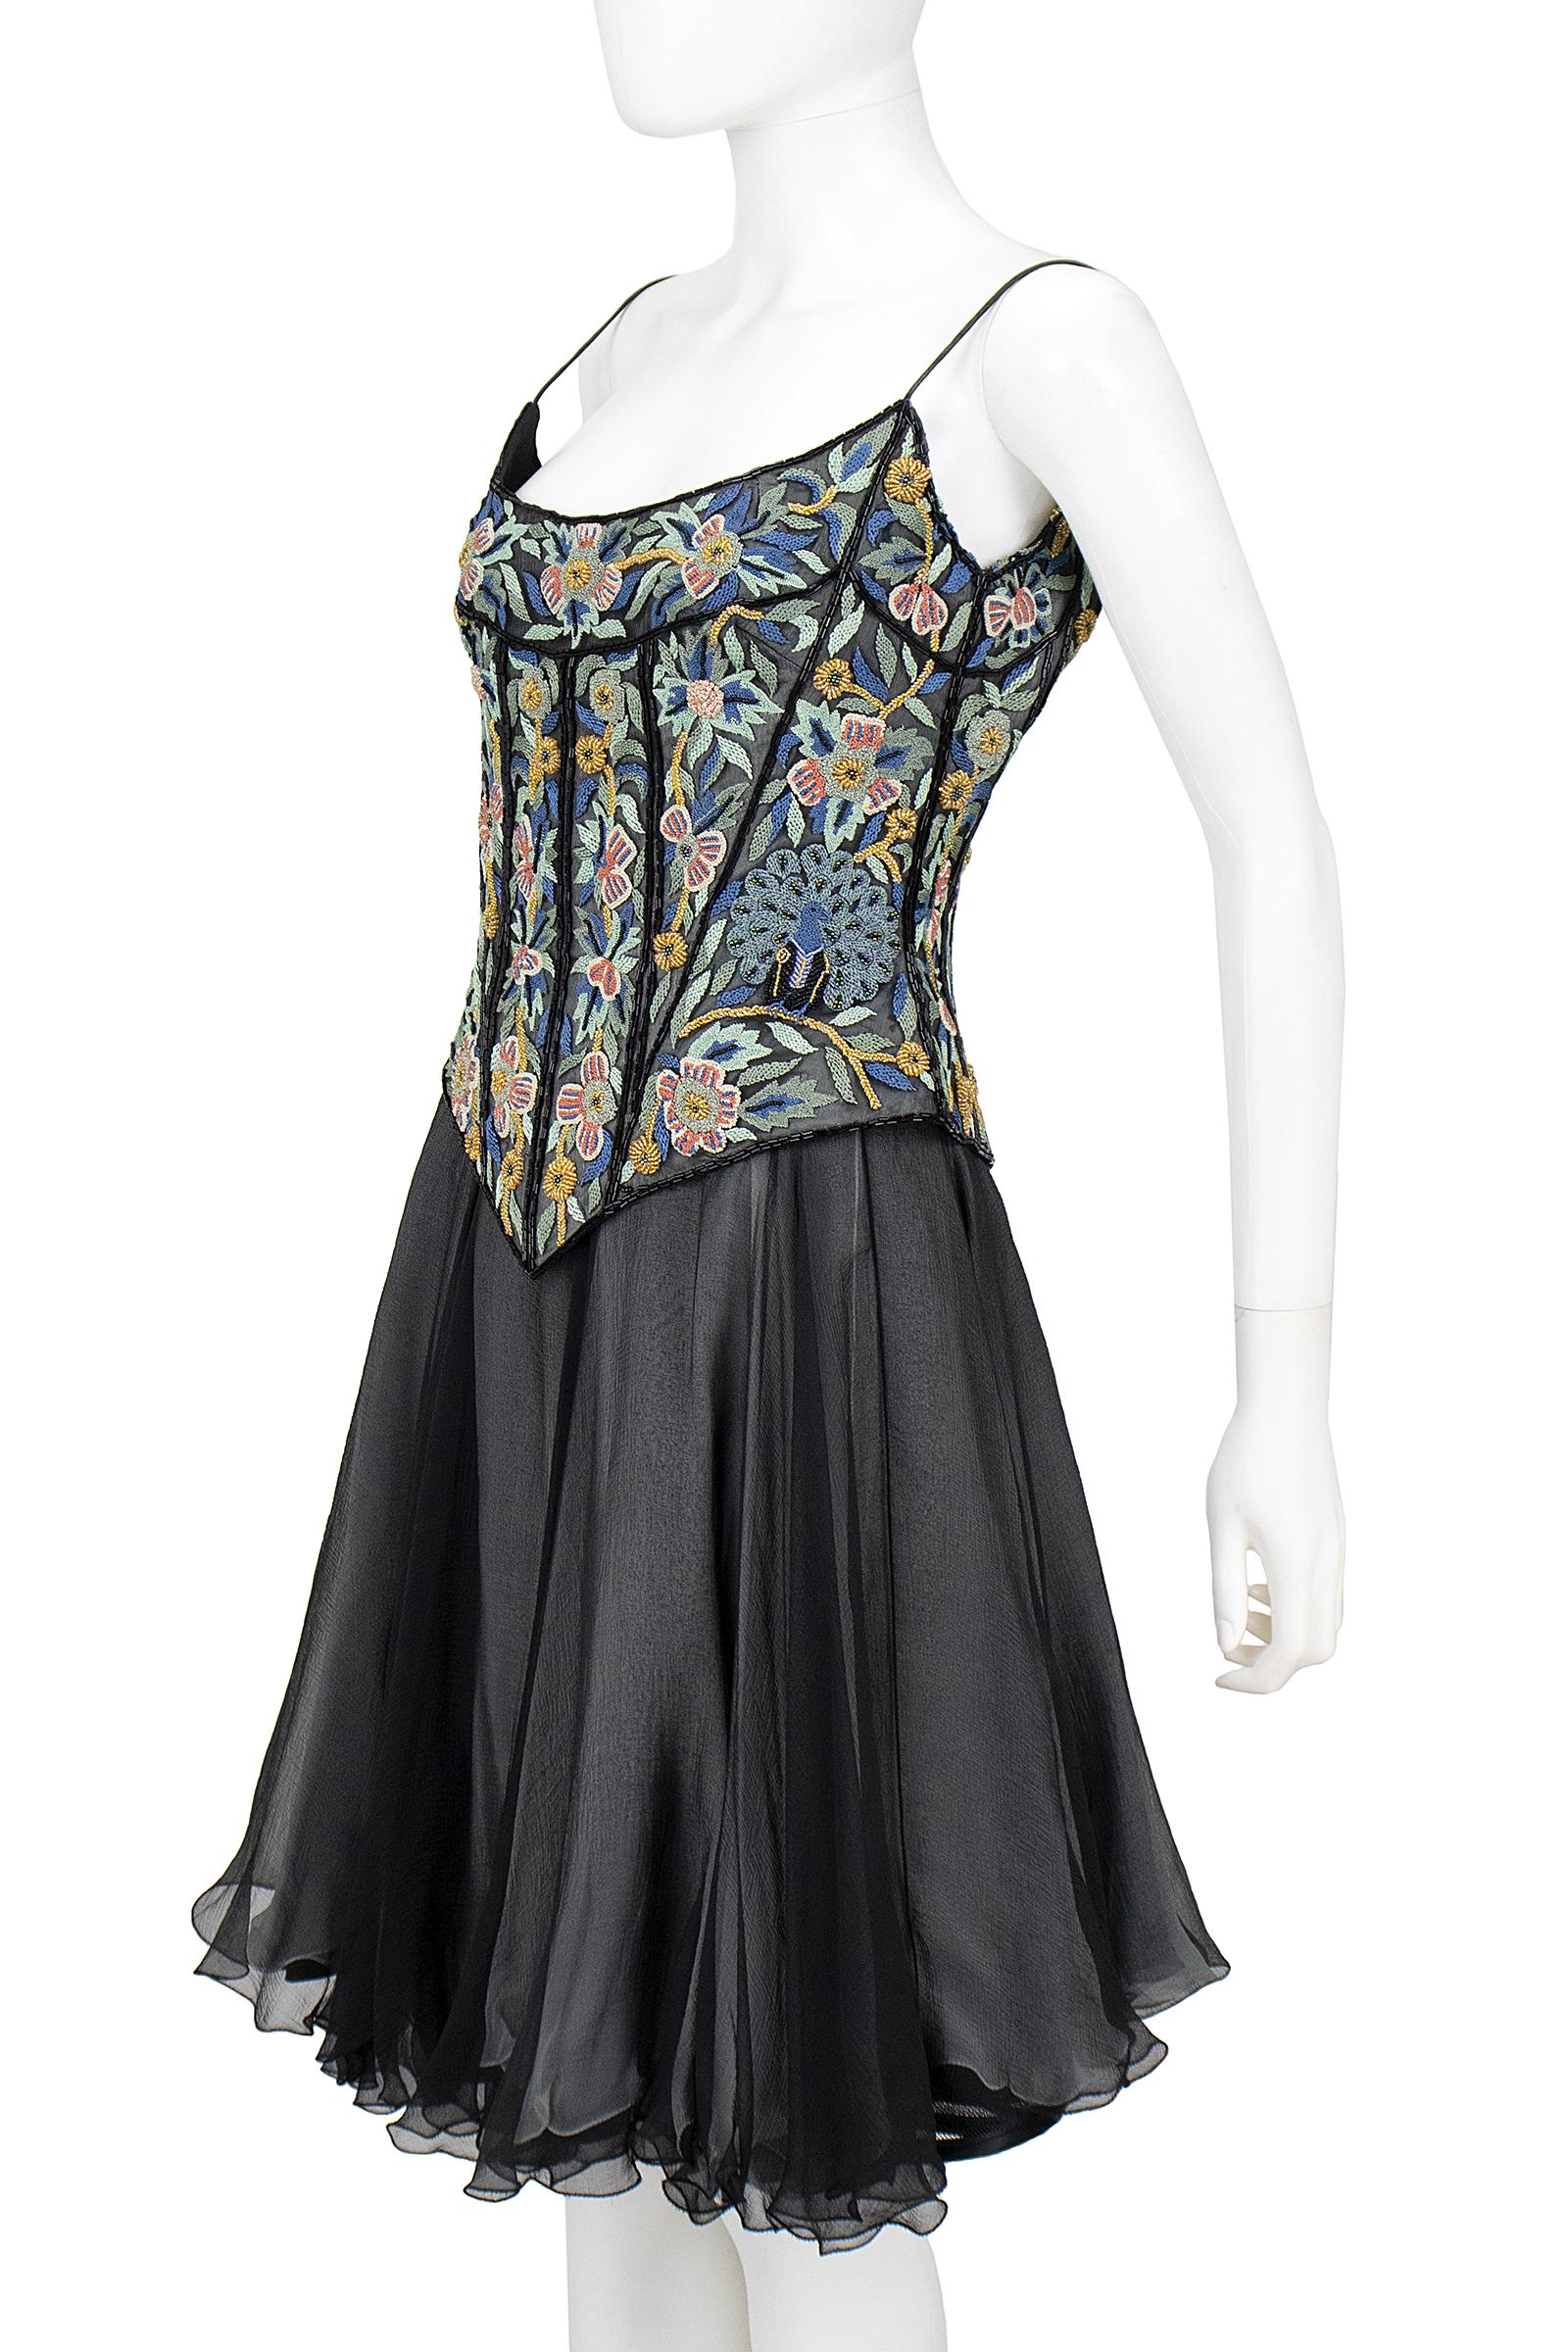 1990s Eavis & Brown London Floral Peacock Beaded Corset and Chiffon Skirt For Sale 1